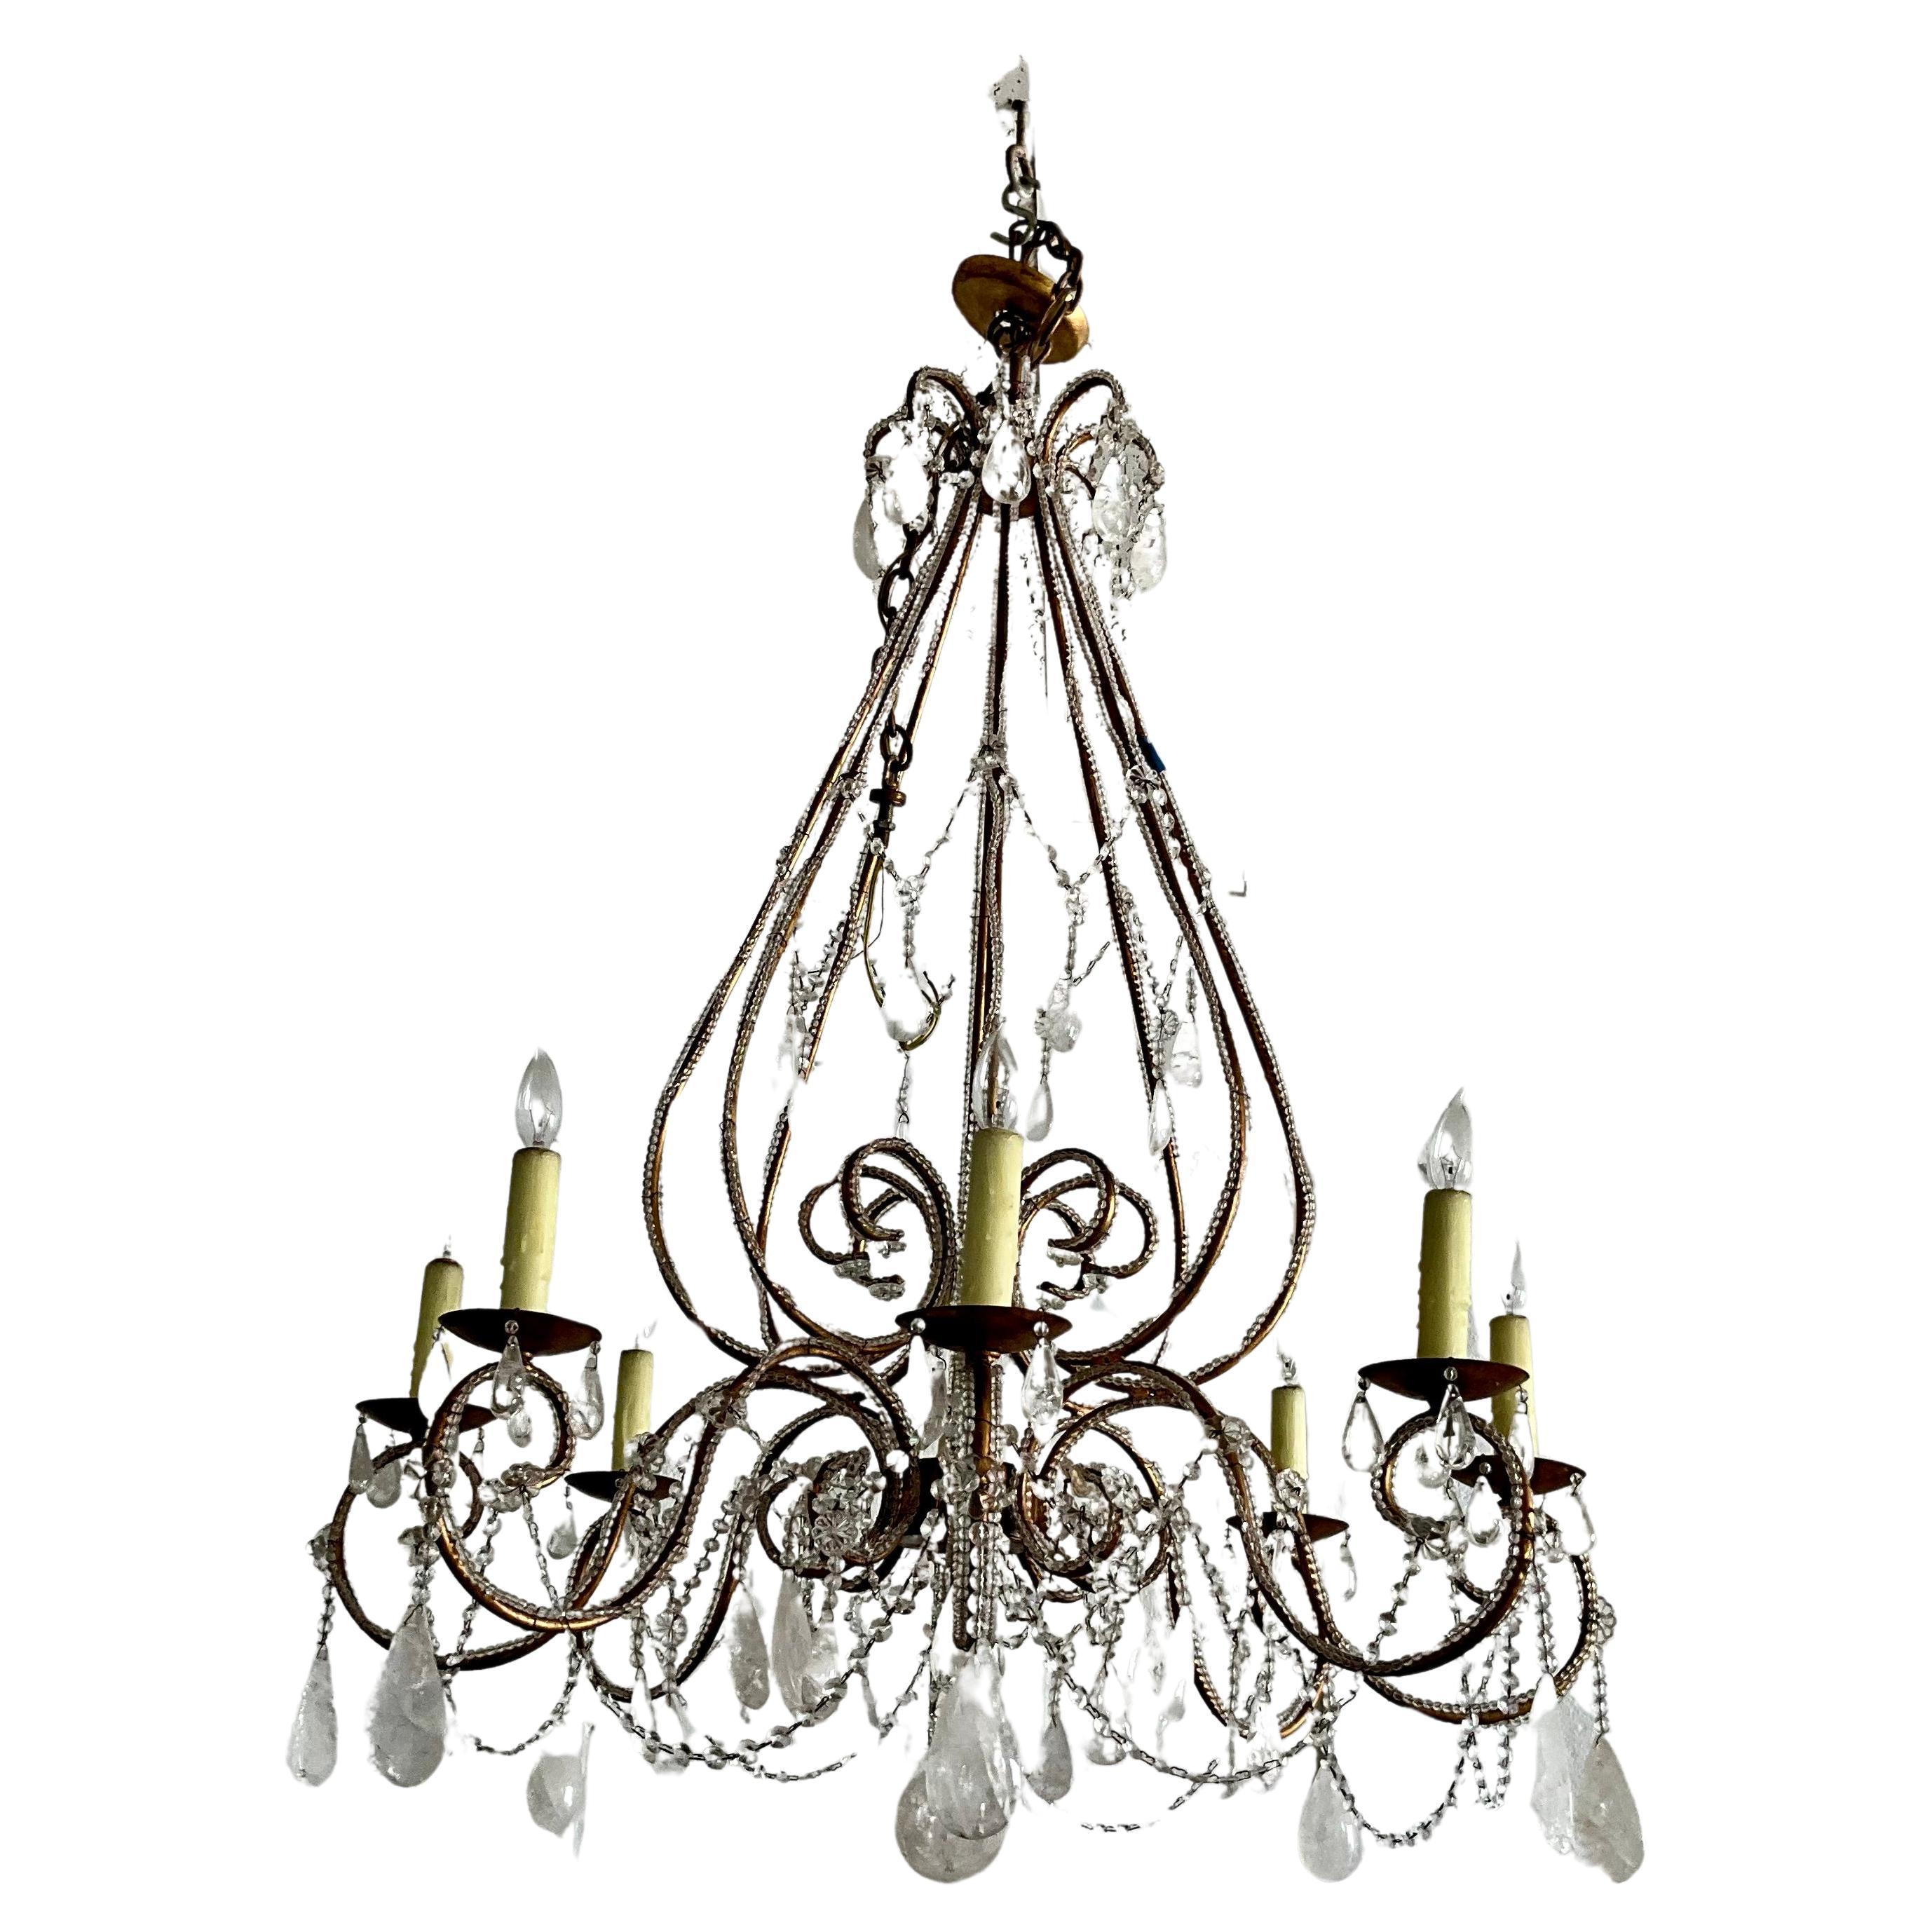 Large 8 Arm Venetian Tole and Rock Crystal Chandelier For Sale